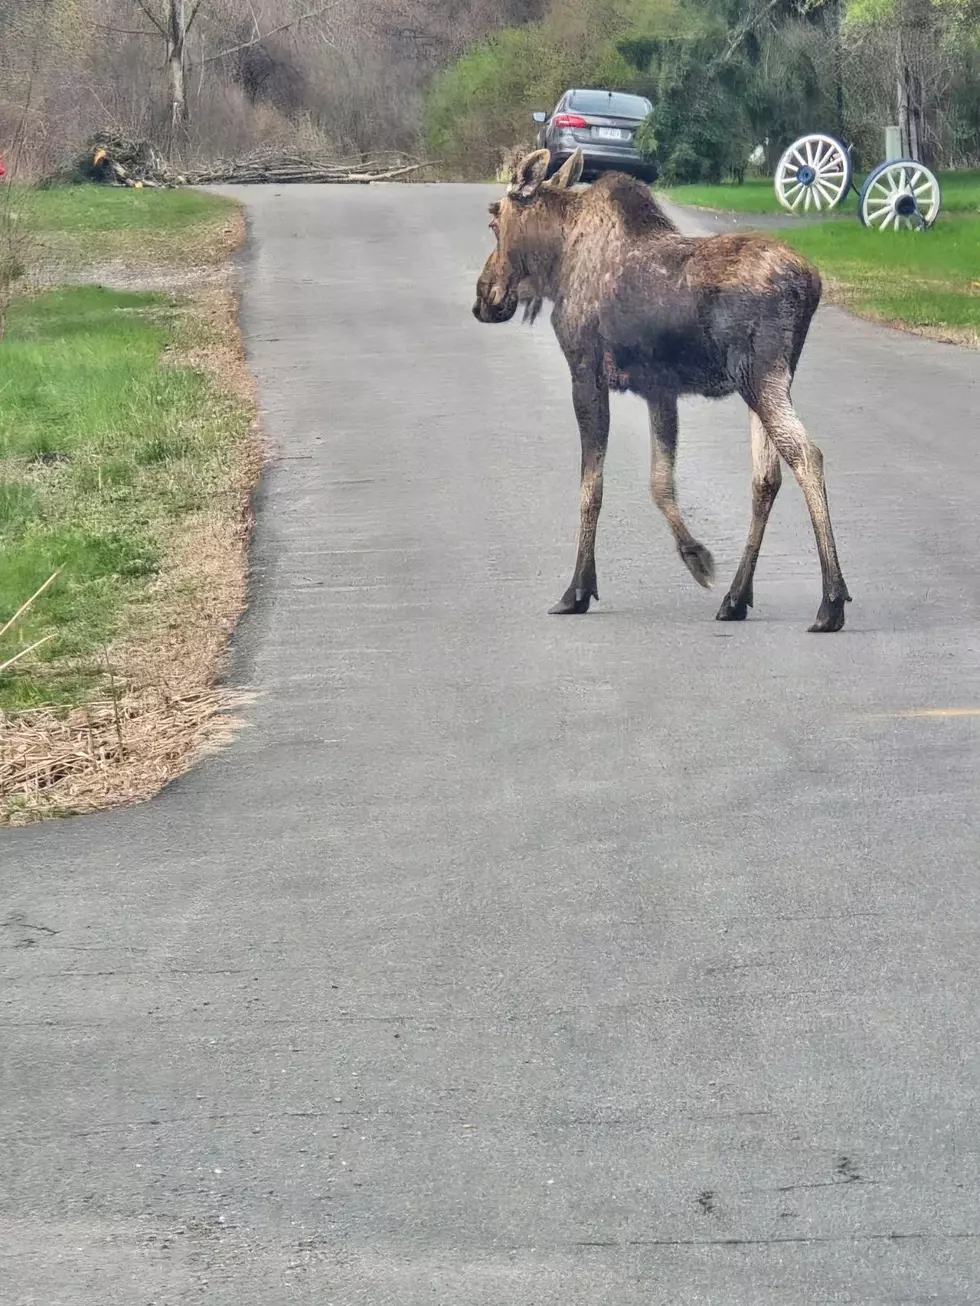 Police Remind Public As Moose Spotted in Residential Area in New York State